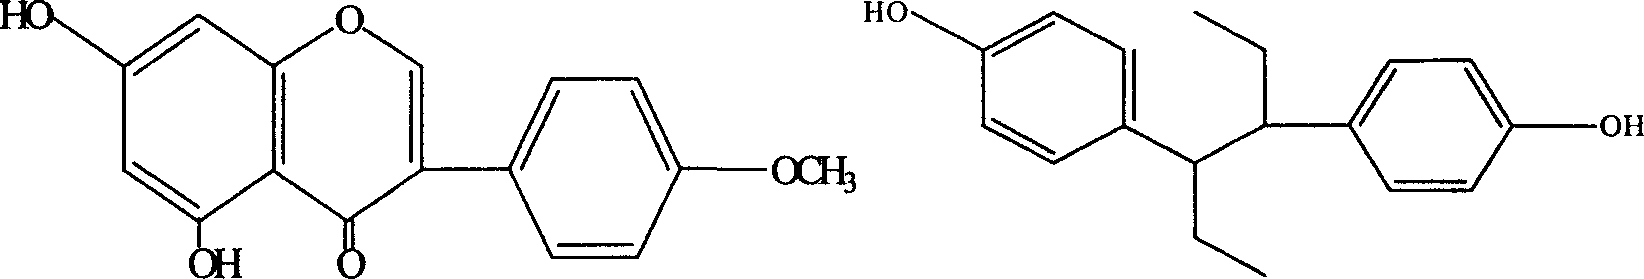 Vegetable estrogen analogy composition capable of replacing estrogen and its application